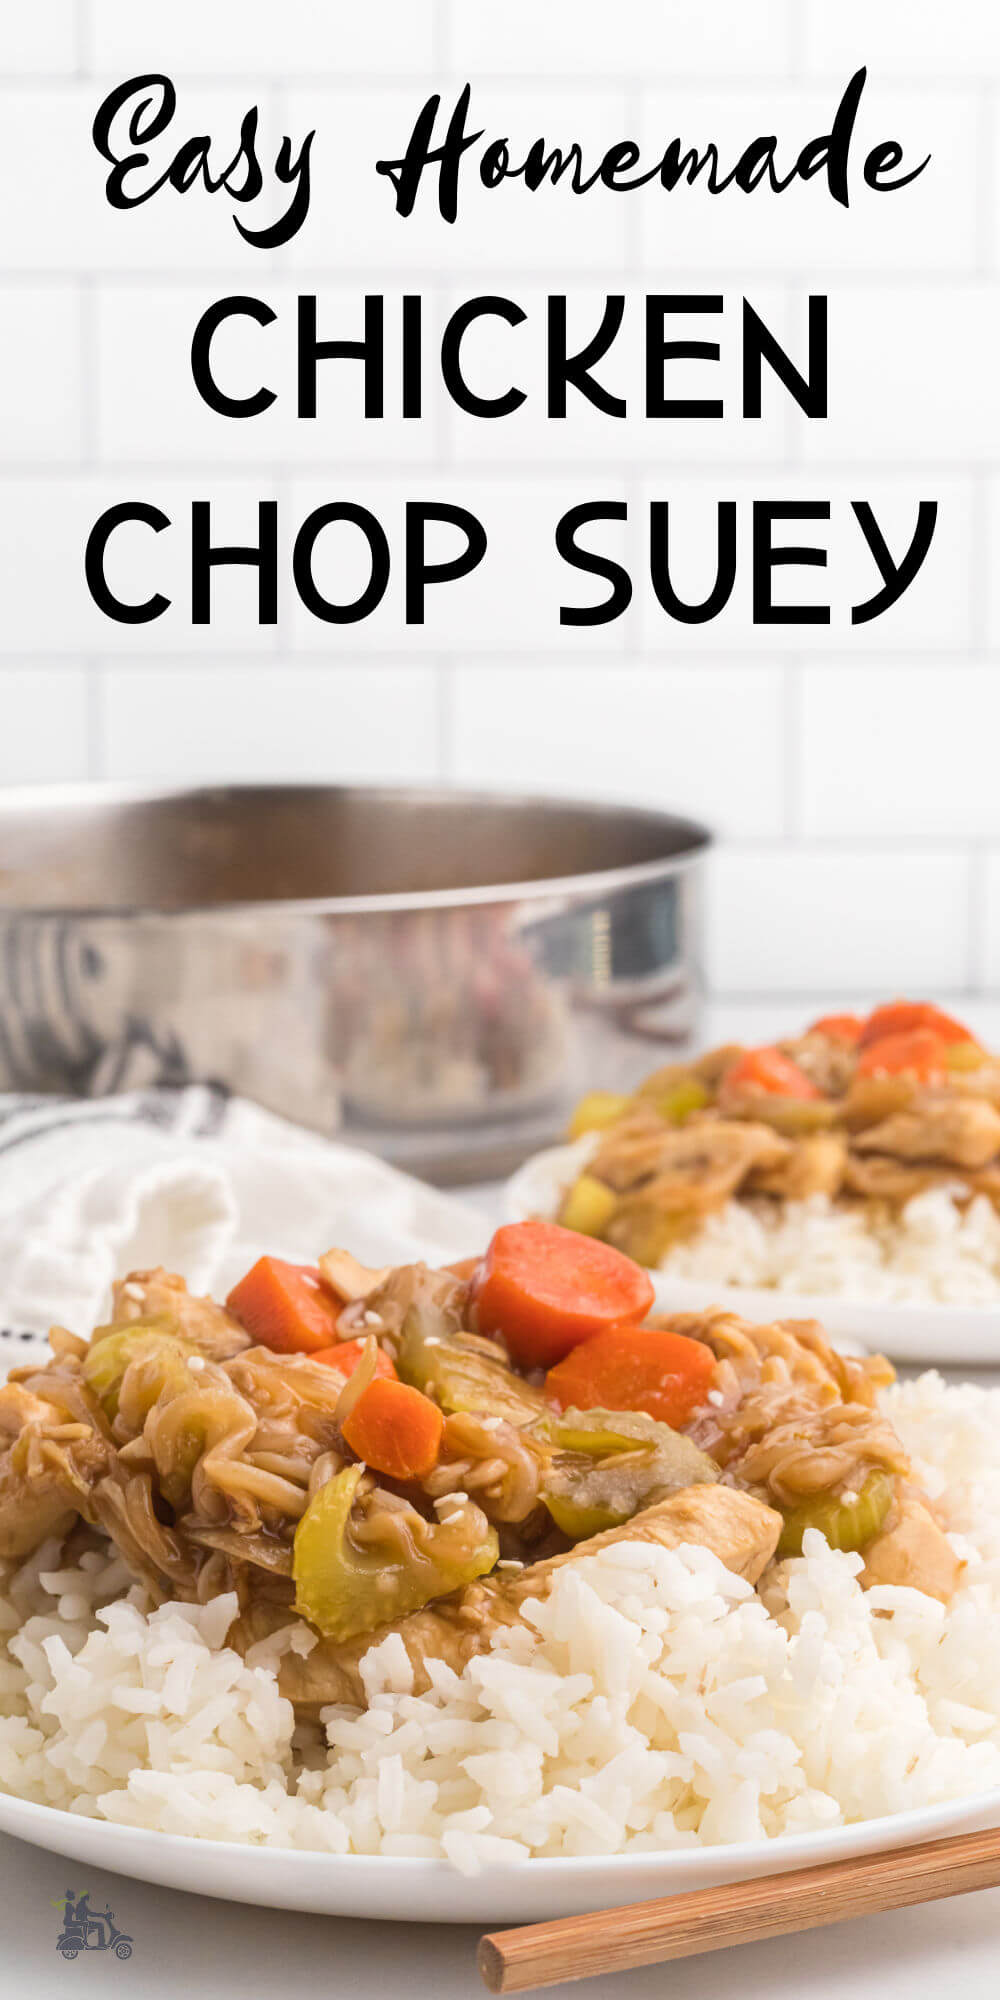 Chicken Chop Suey includes tender strips of chicken, an assortment of veggies, noodles, and a rich savory sauce - totally addictive, healthy, and restaurant-quality! This is an easy weeknight dinner to get on the table in about 30 minutes.